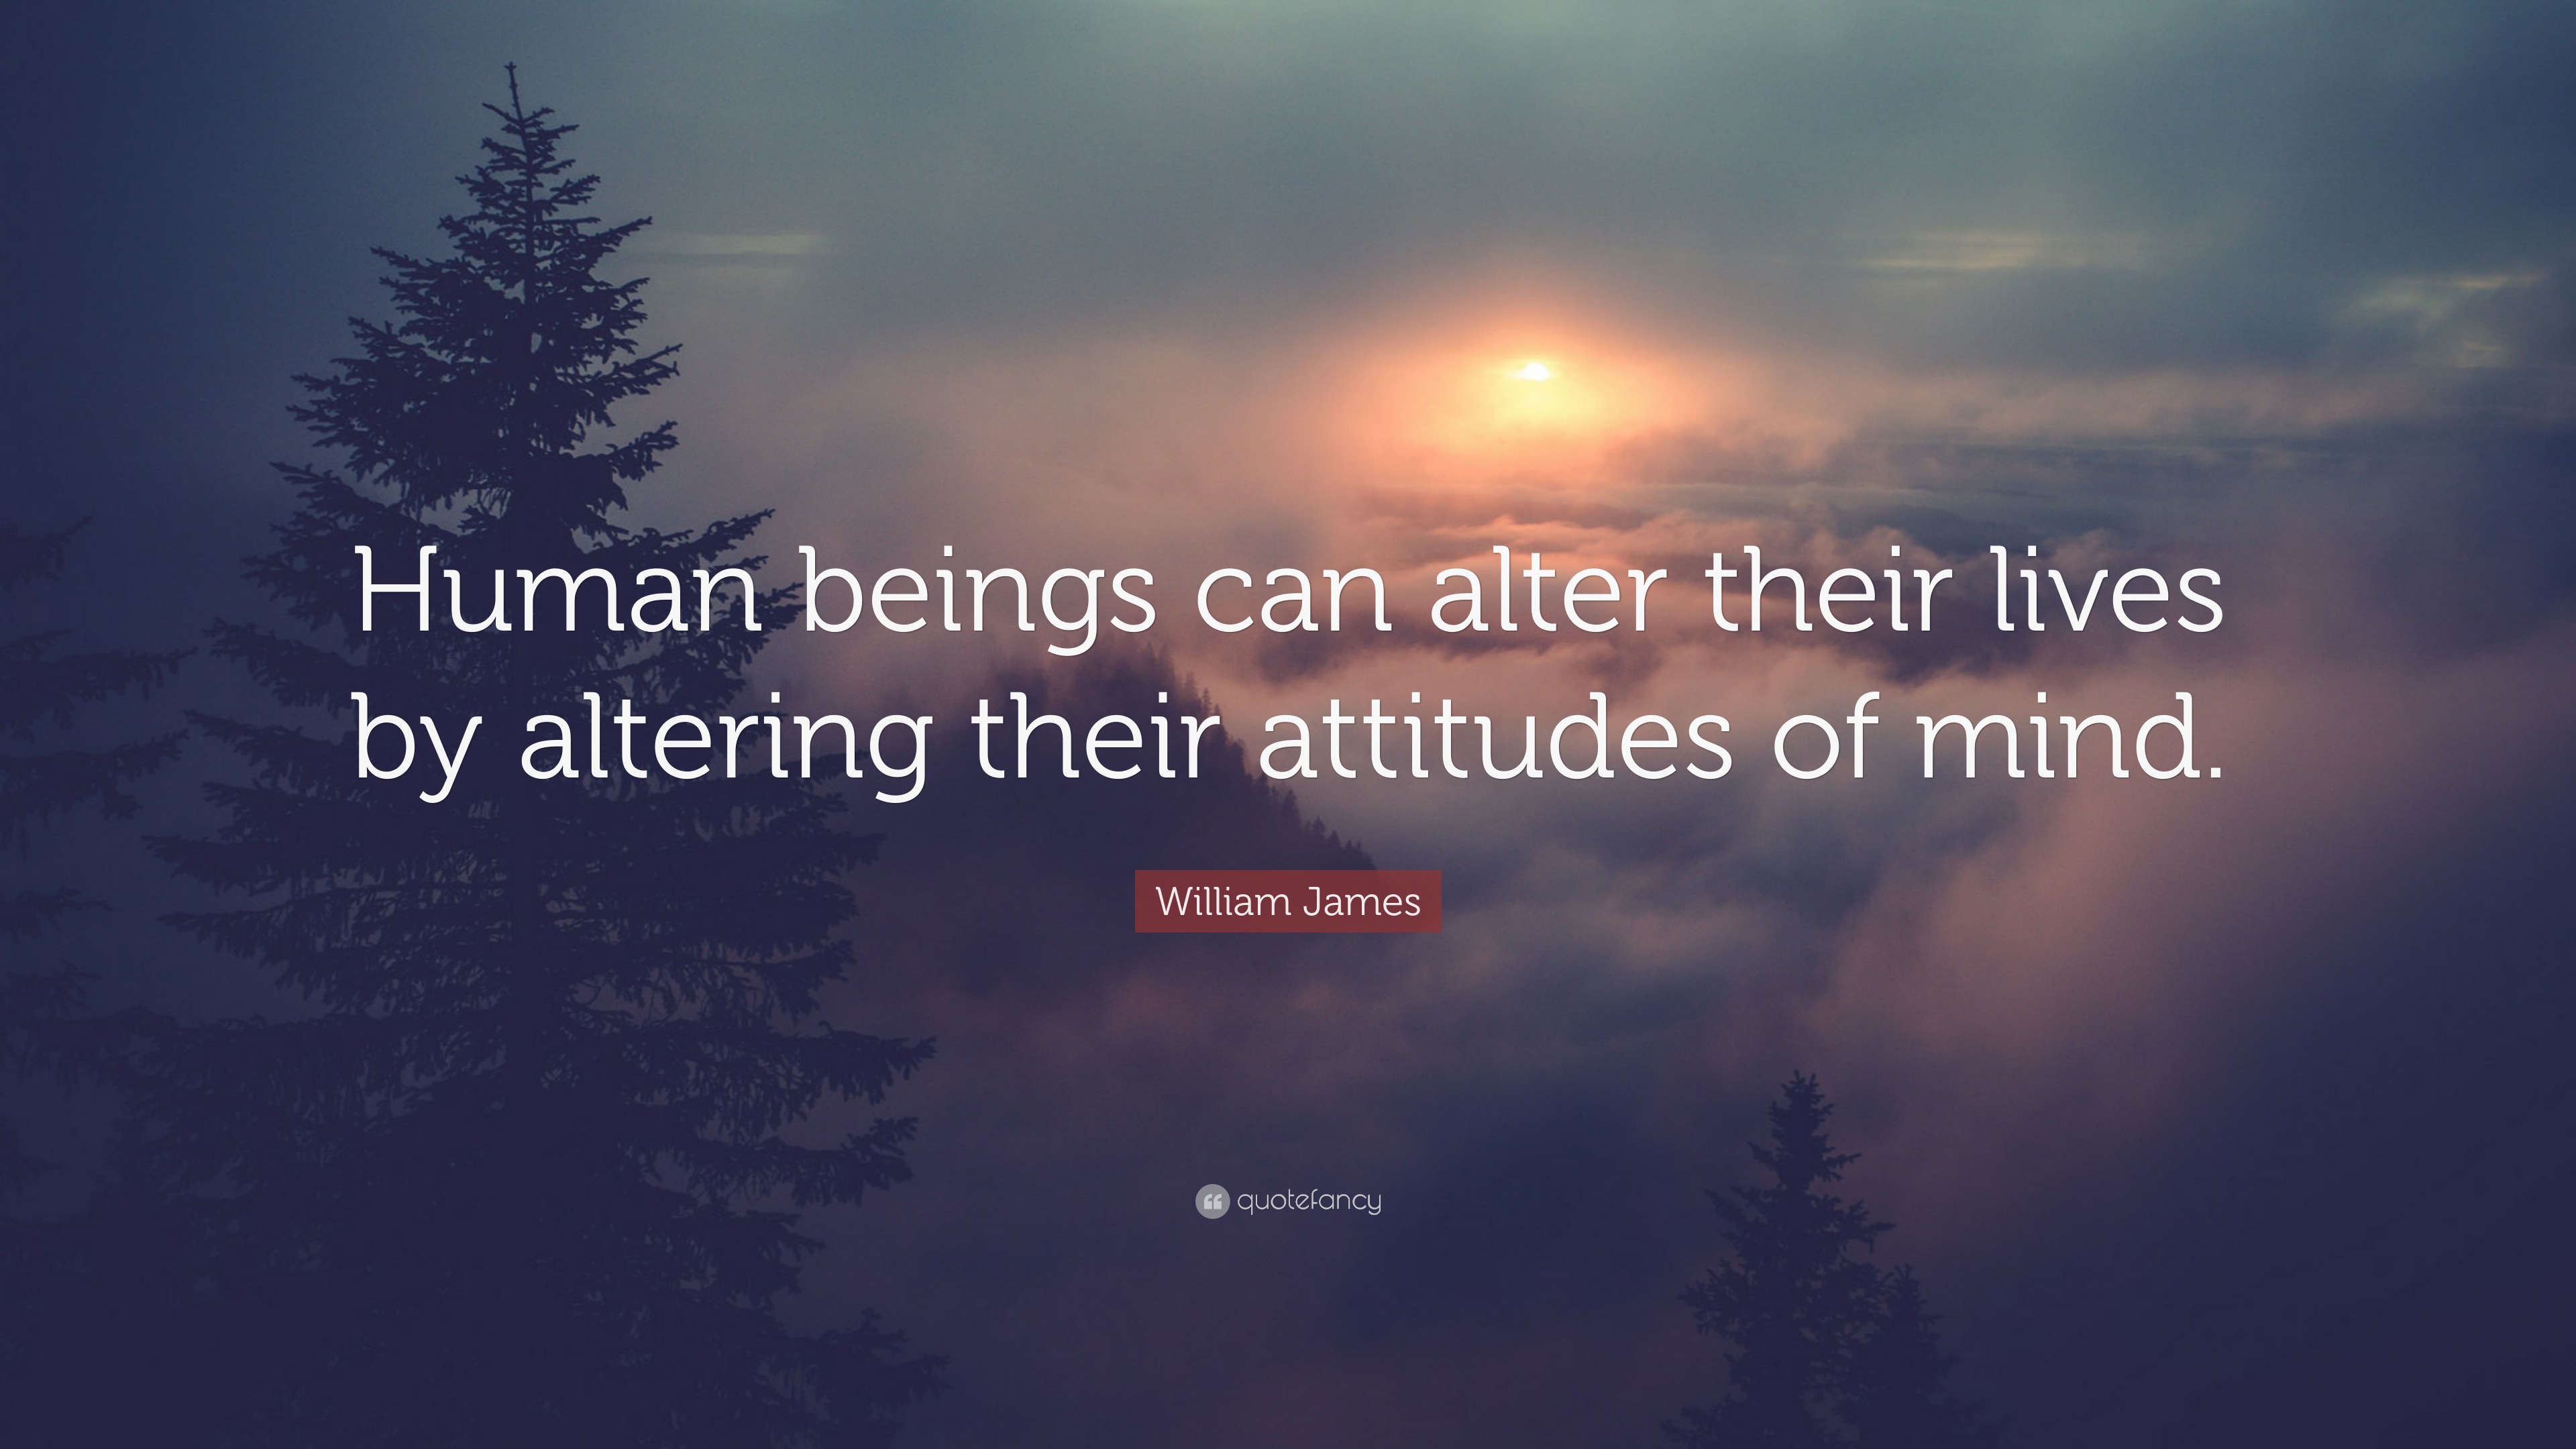 William James Quote: “Human beings can alter their lives by altering